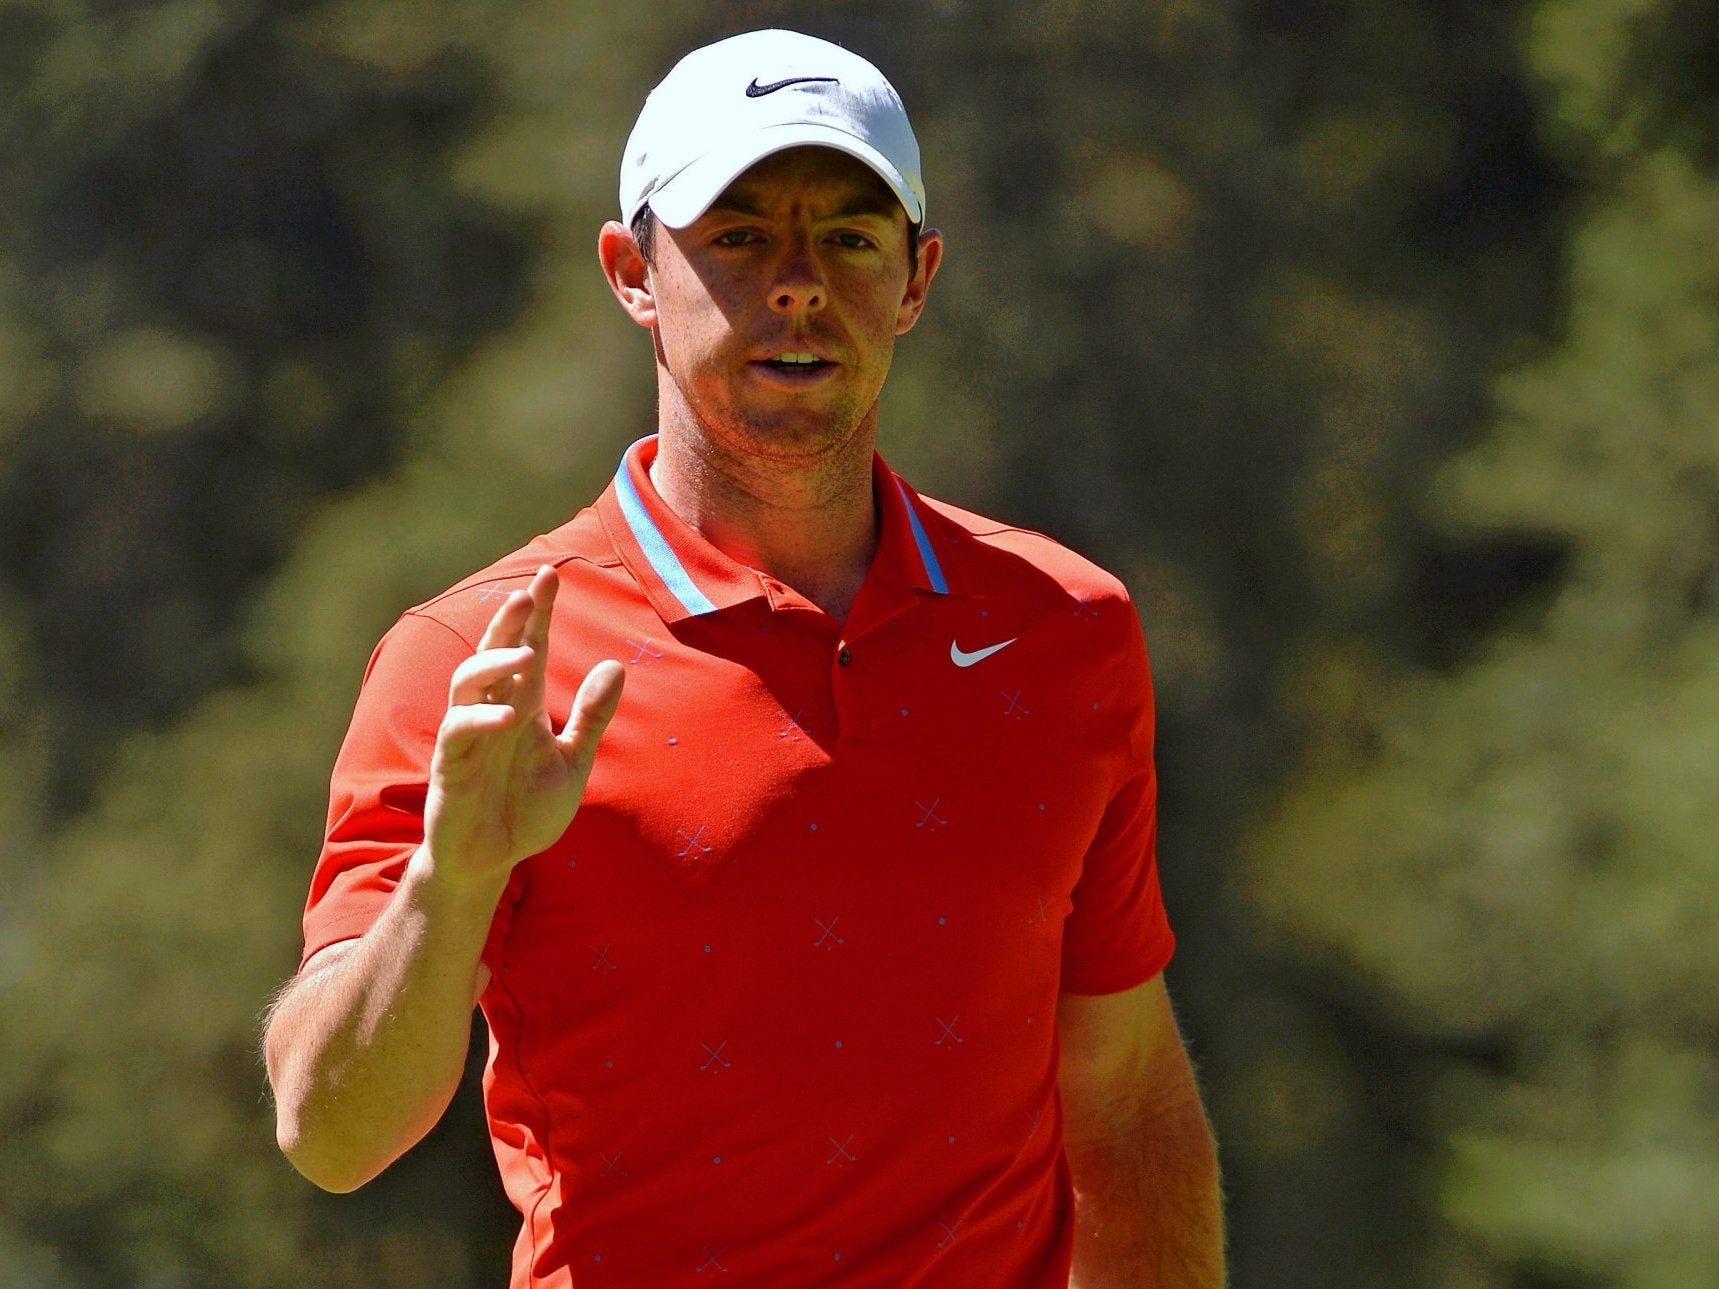 Rory McIlroy leads the WGC-Mexico Championship by a shot ahead of Dustin Johnson